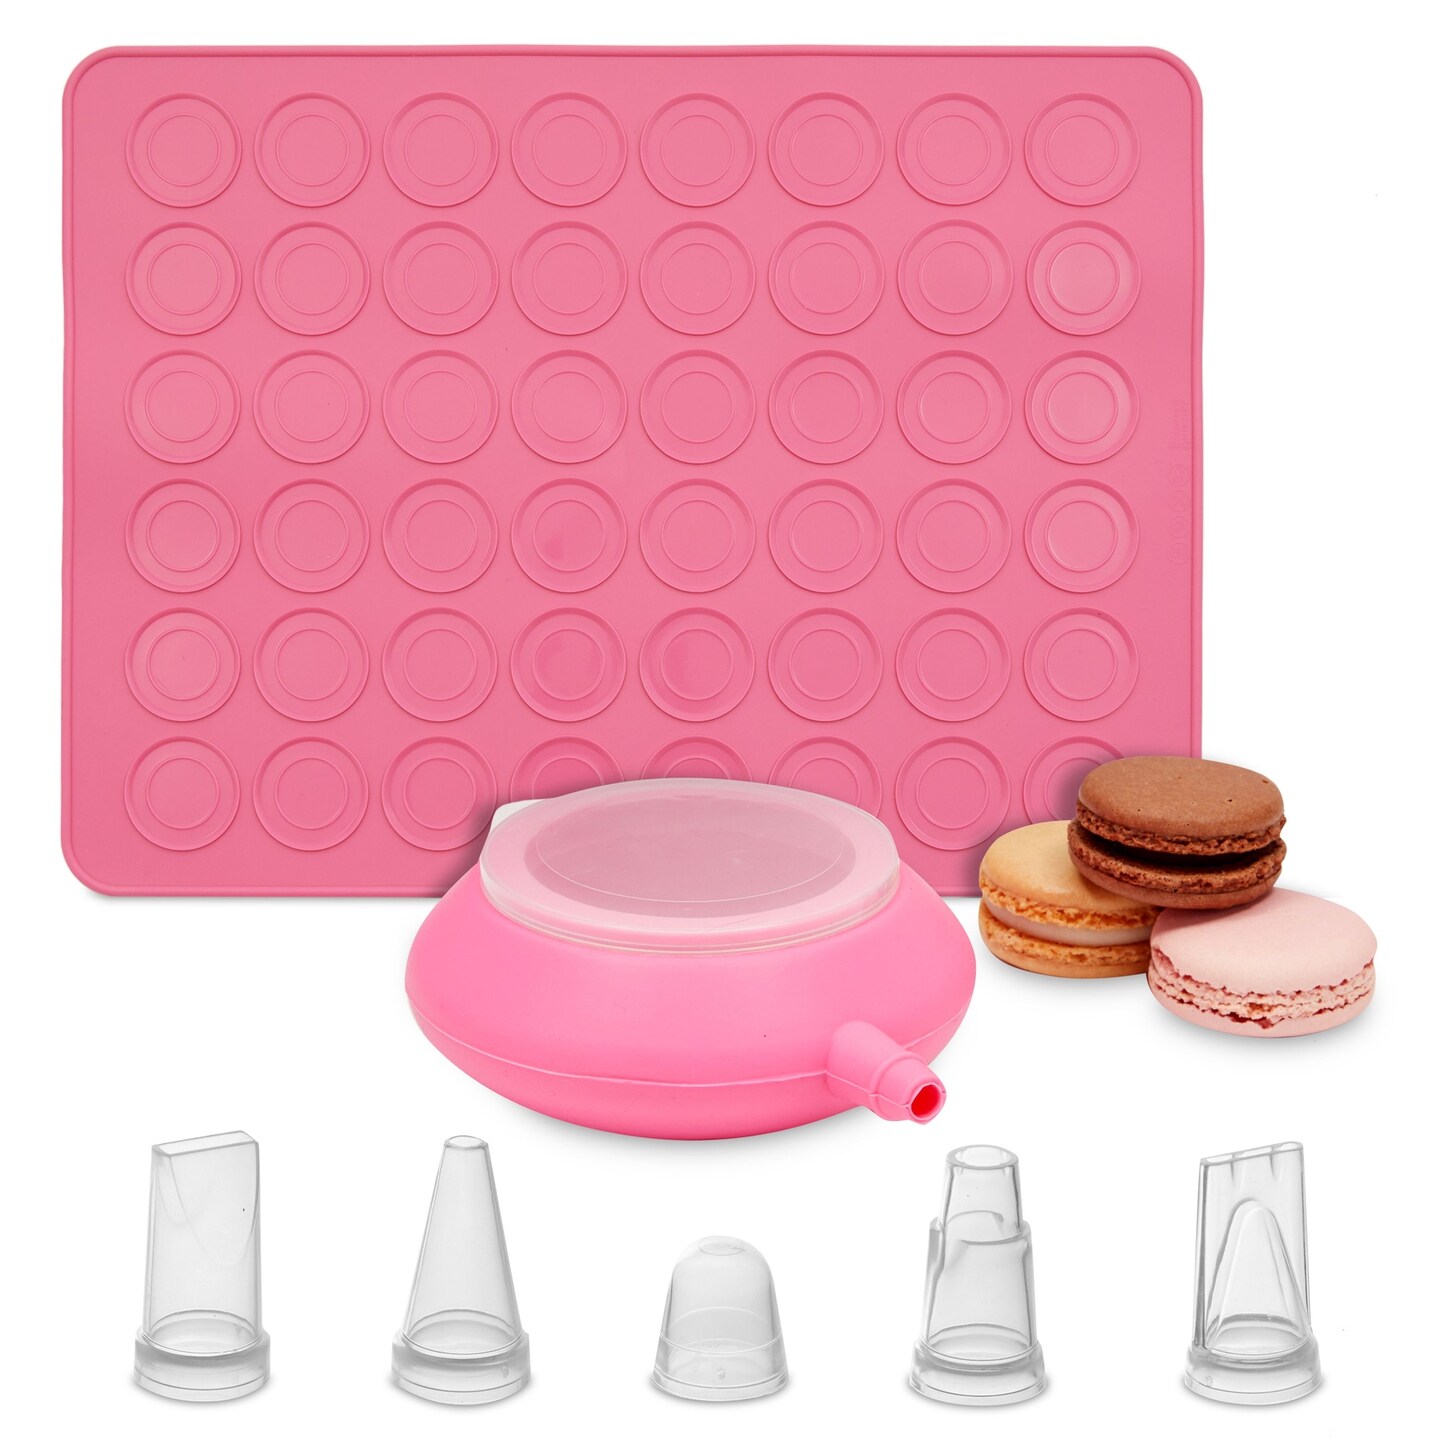 Zulay Kitchen Macaron Silicone Baking Mats With Pre-printed Template Design  - Red, 4 - Kroger